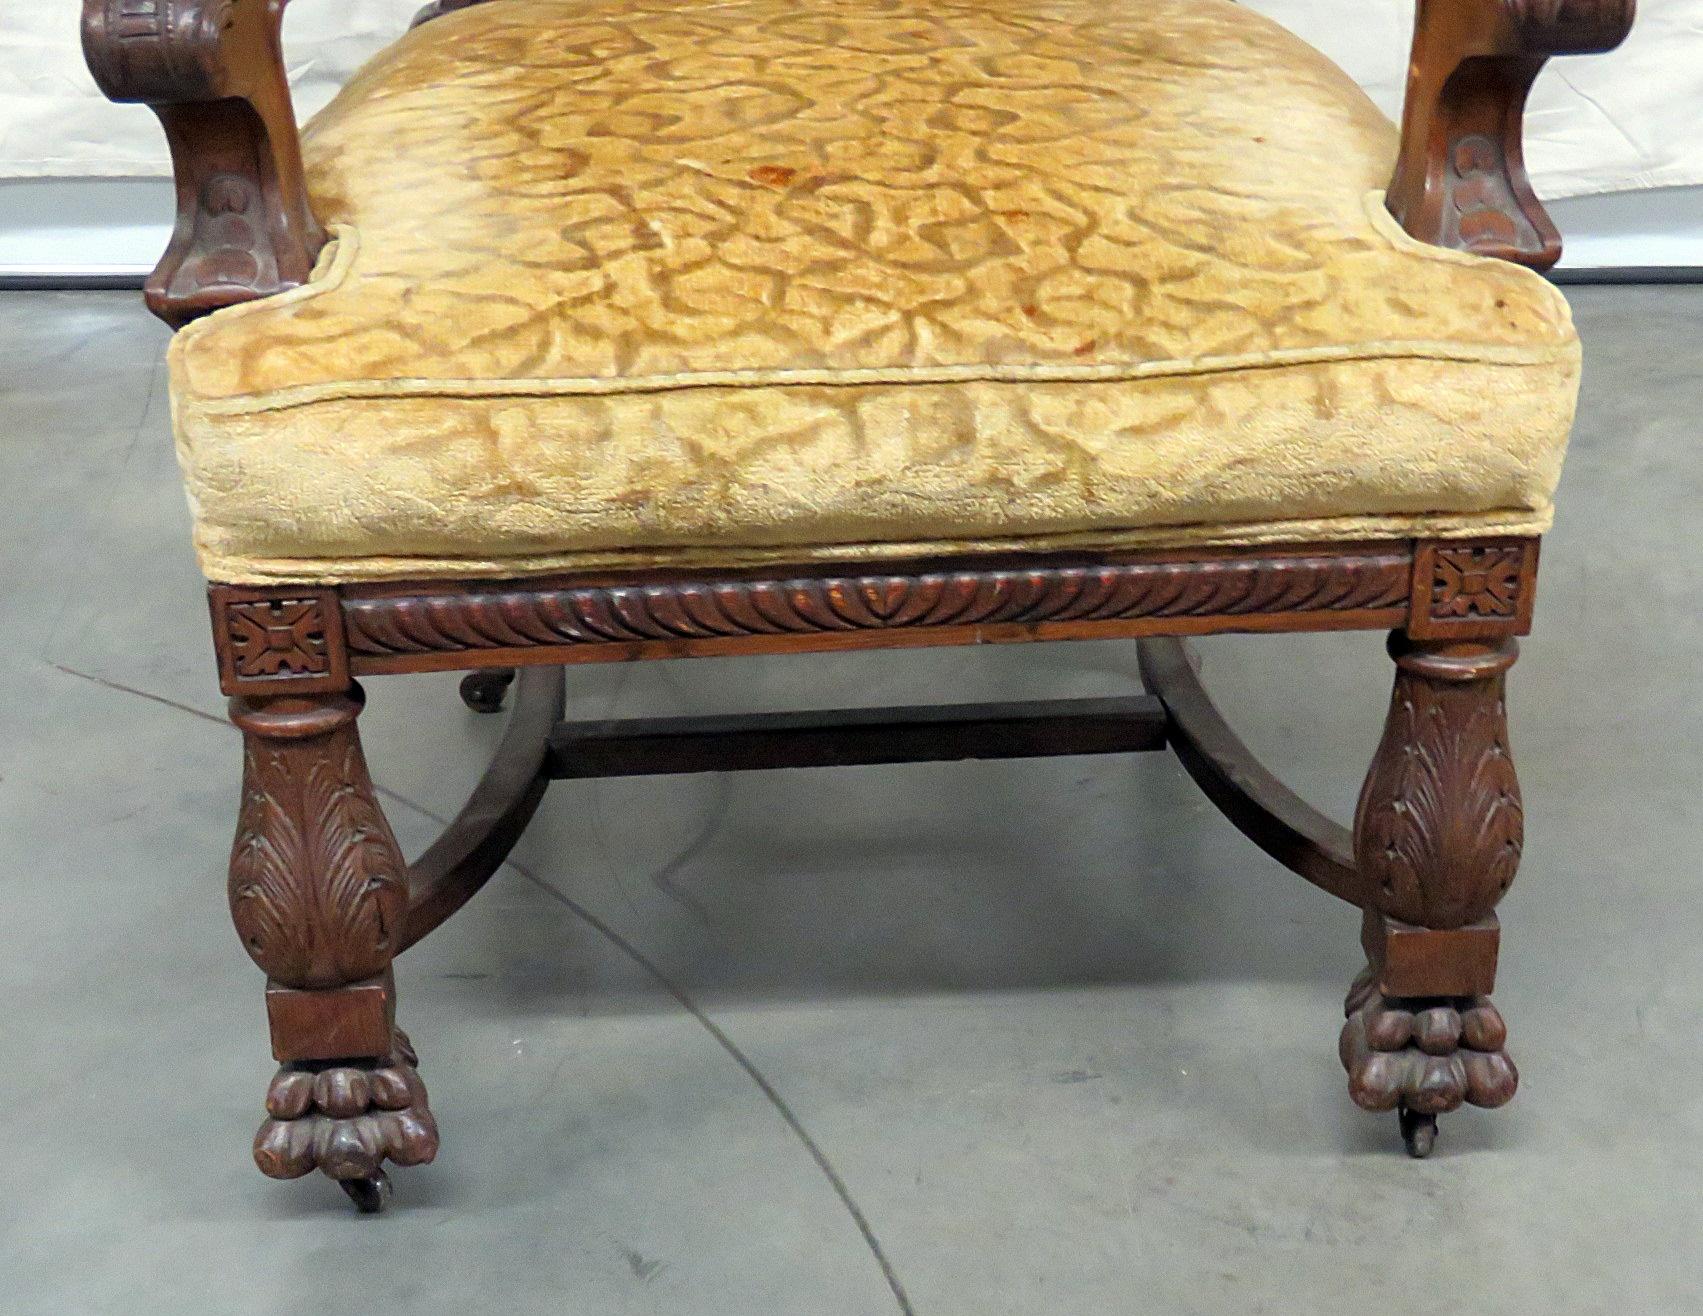 Renaissance style oak throne chair, attributed to Horner, with paw front feet and textured upholstery on casters.